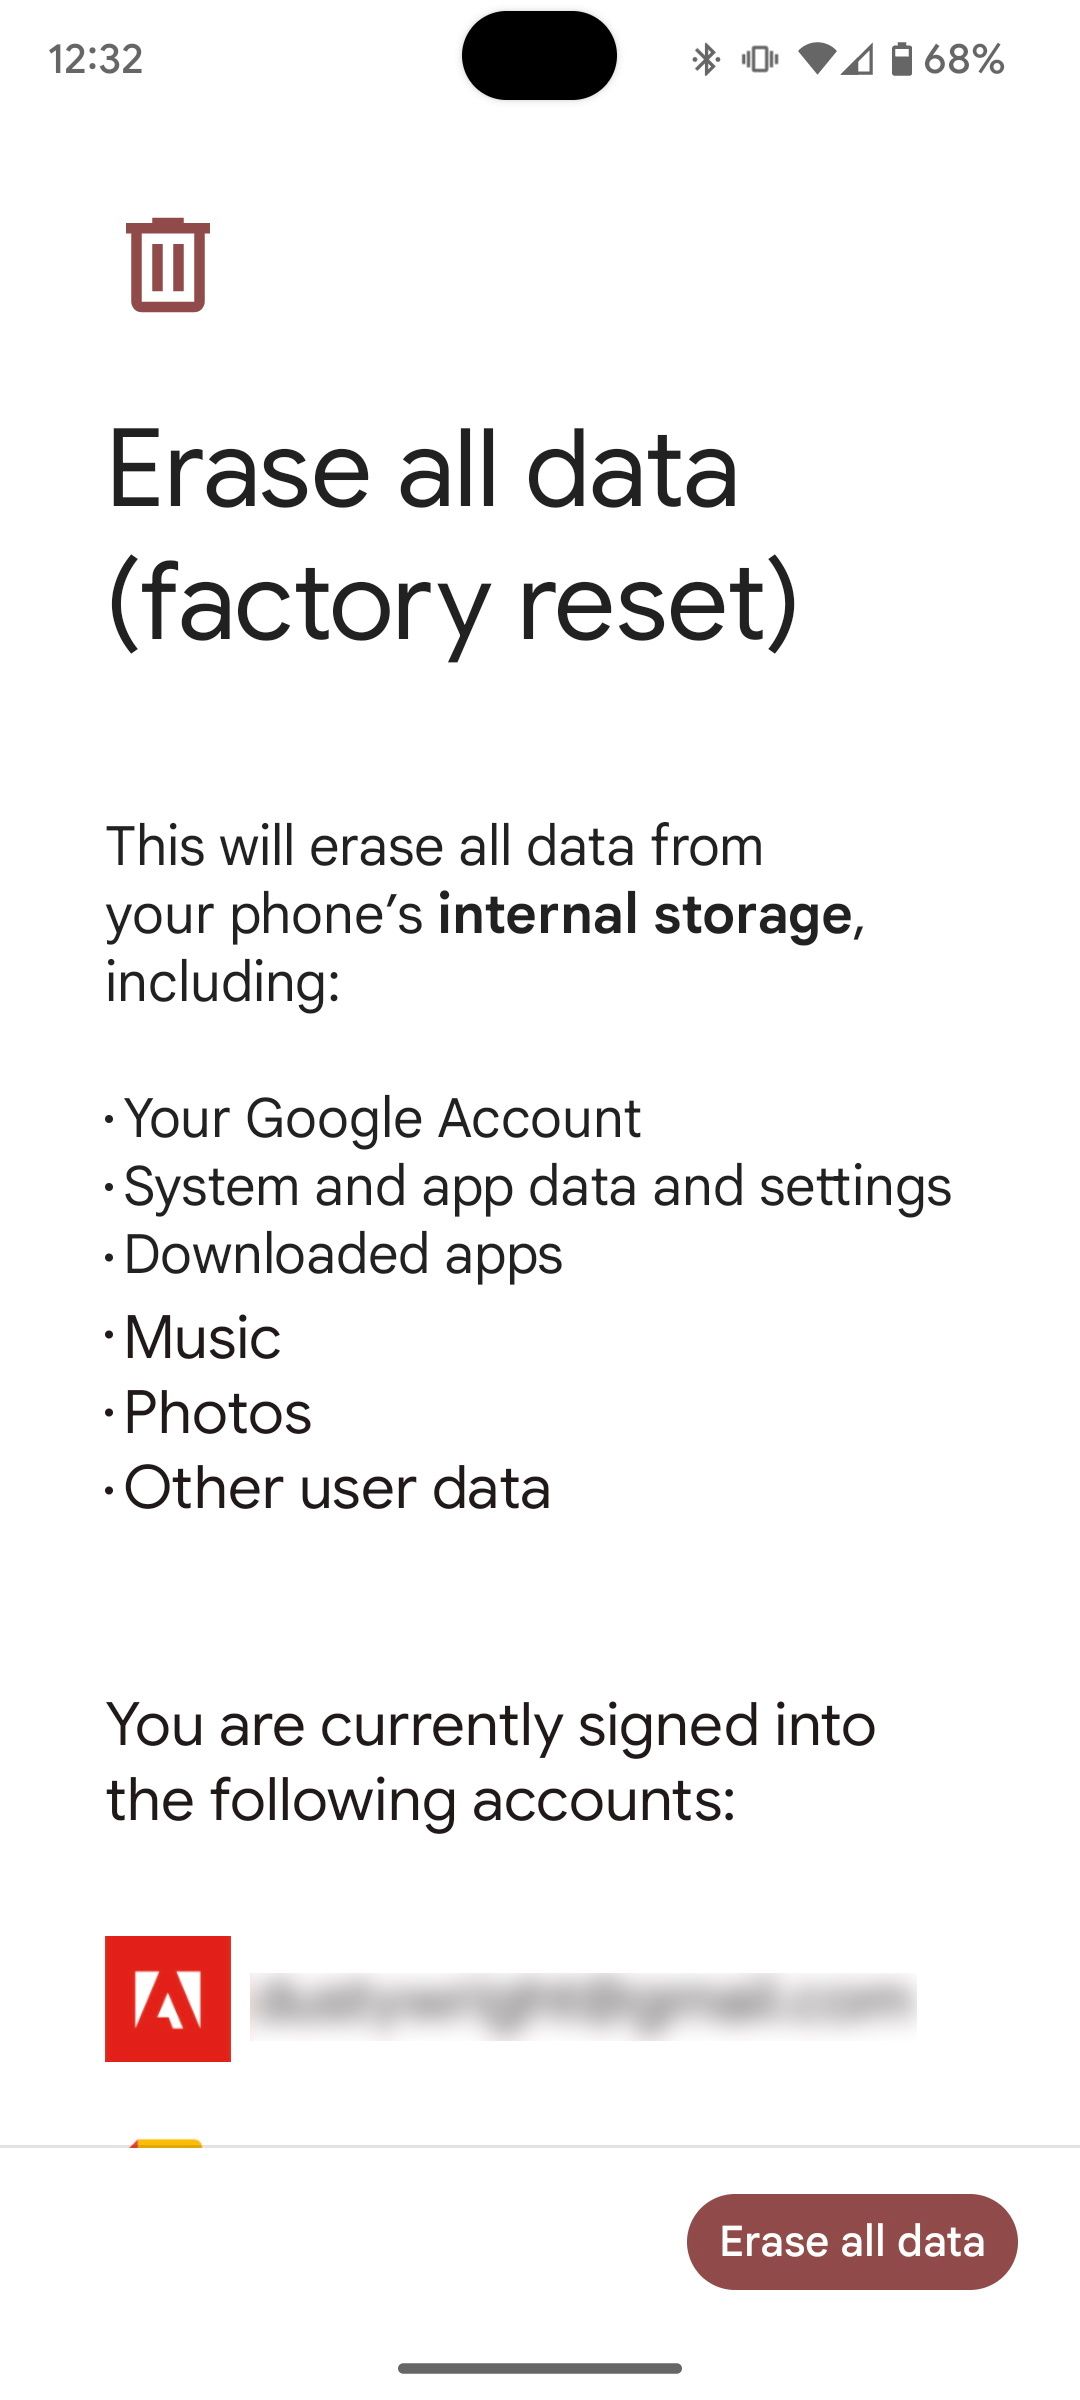 Warning stating that factory resetting will erase all data on phone